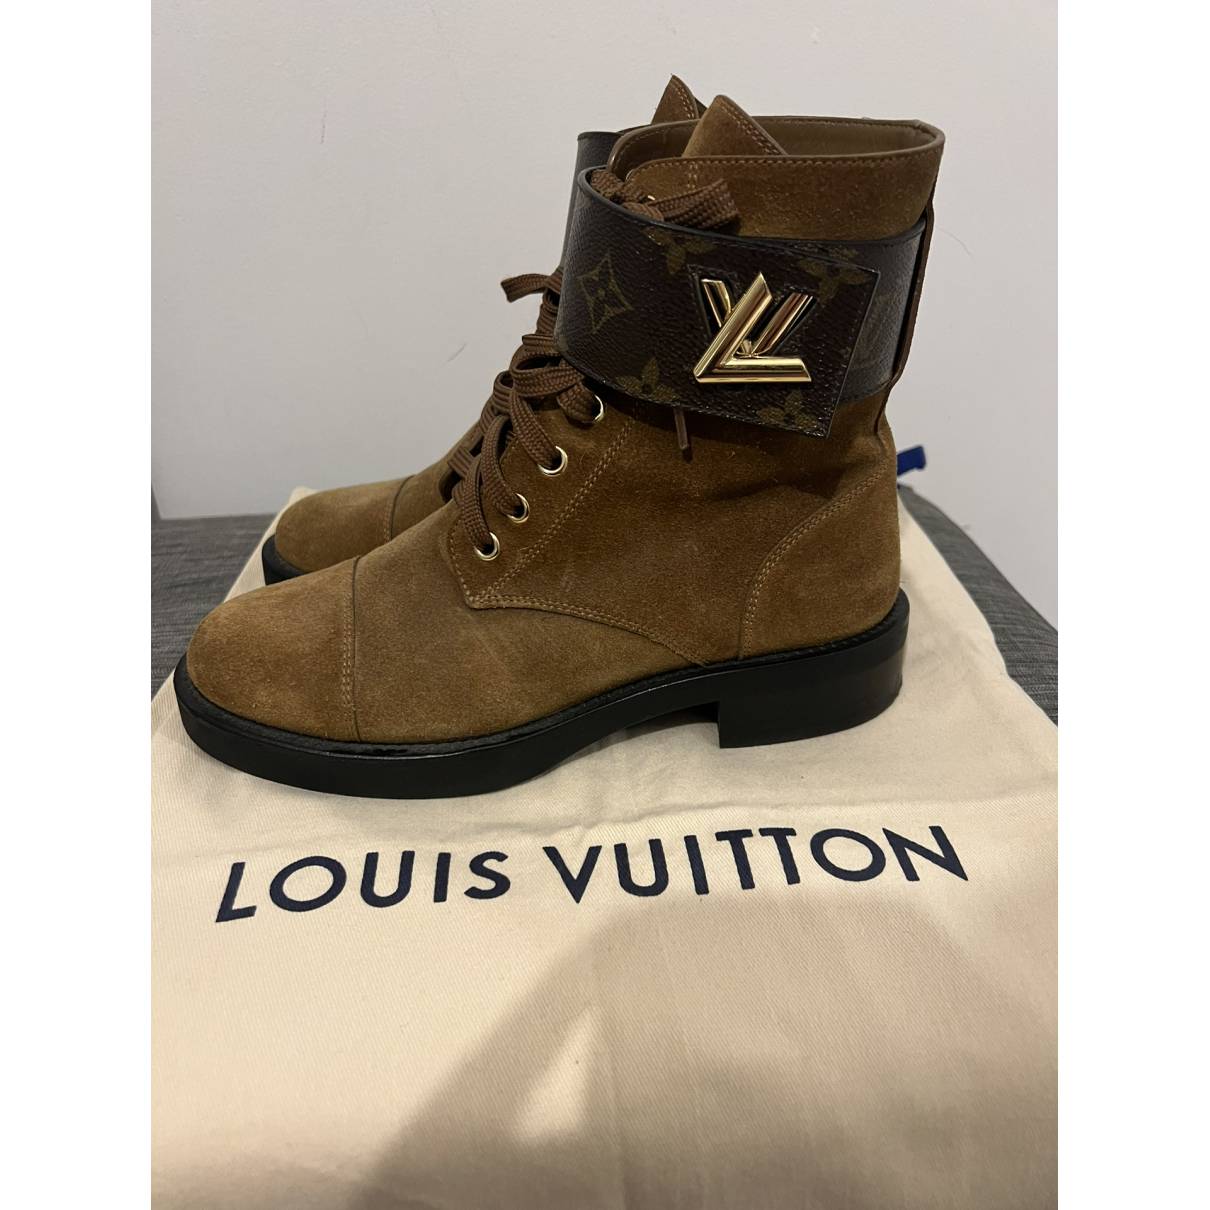 Louis Vuitton - Authenticated Wonderland Ankle Boots - Leather Brown Plain for Women, Very Good Condition